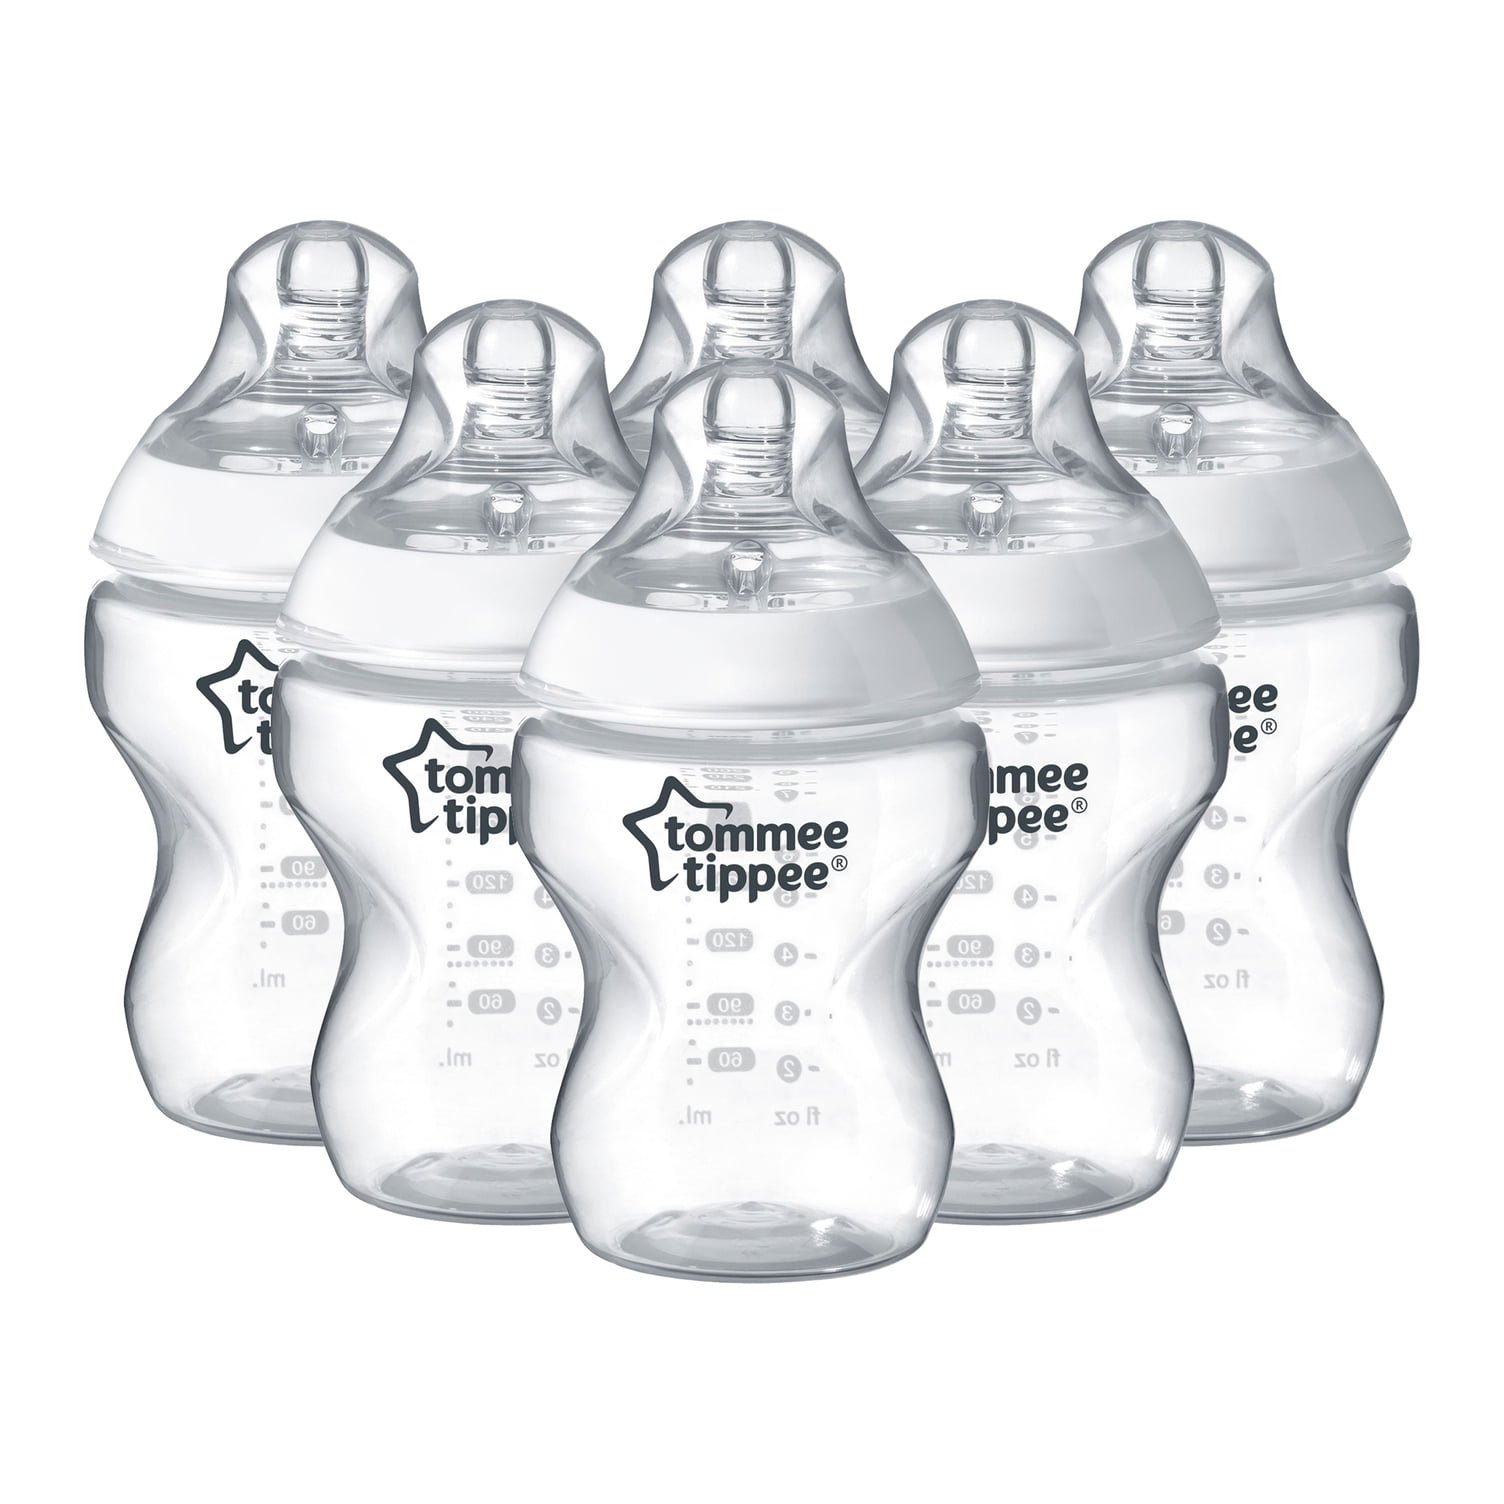 Closer to Nature Baby Bottle | Breast-Like Nipple with Anti-Colic Valve, BPA-free 9-ounce, 6 - Walmart.com